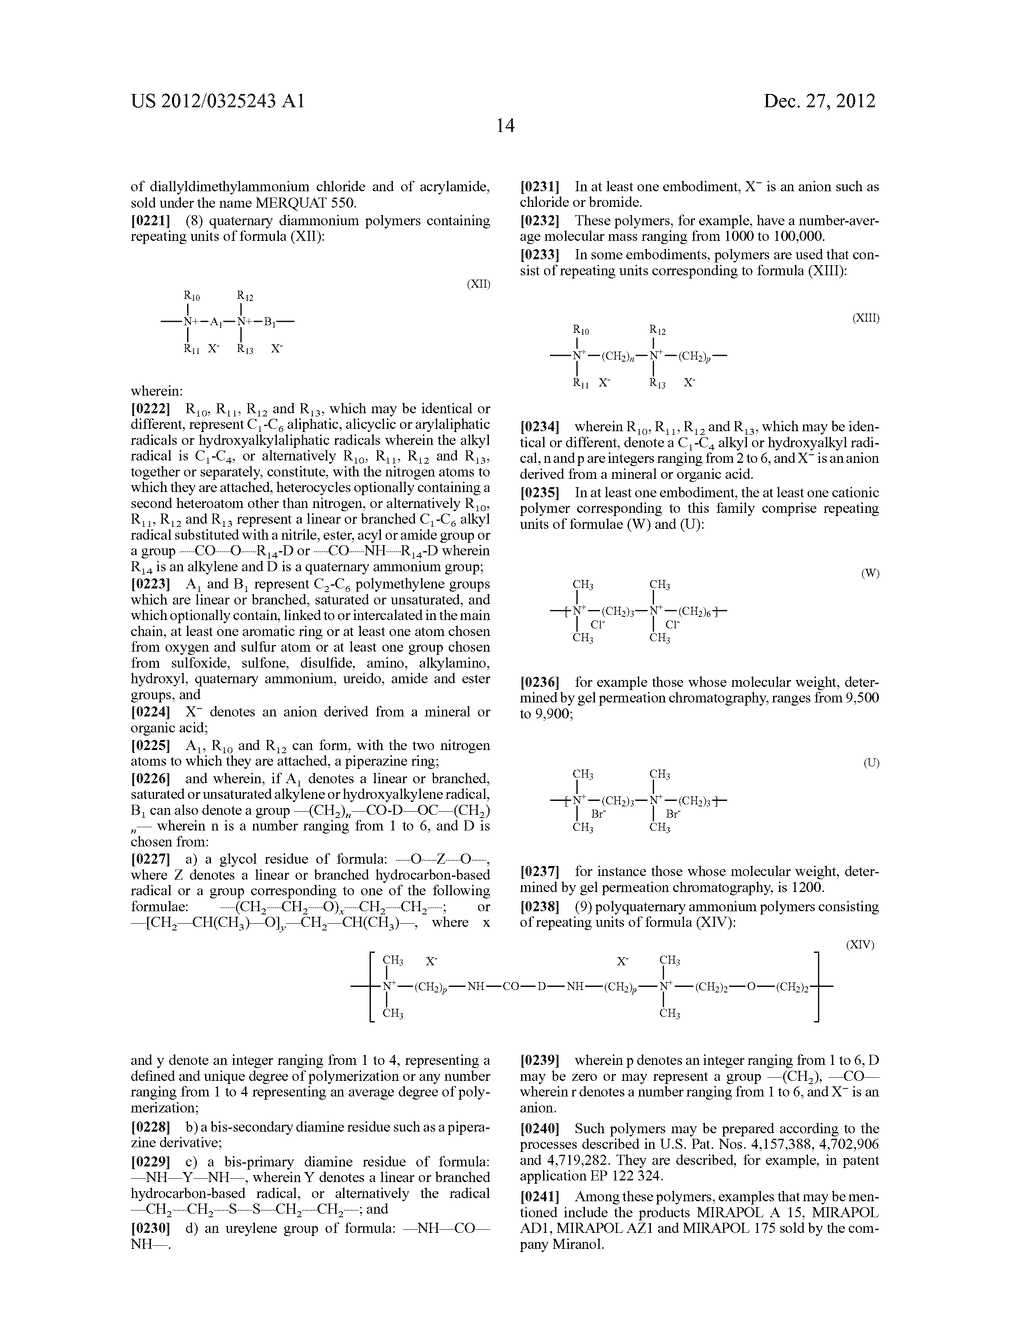 EMULSION DYEING COMPOSITION CONTAINING AT LEAST ONE PHOSPHOLIPID, AT LEAST     ONE NONIONIC SURFACTANT AND AT LEAST ONE PHOSPHATE ESTER, AND METHOD OF     USING SAME - diagram, schematic, and image 15